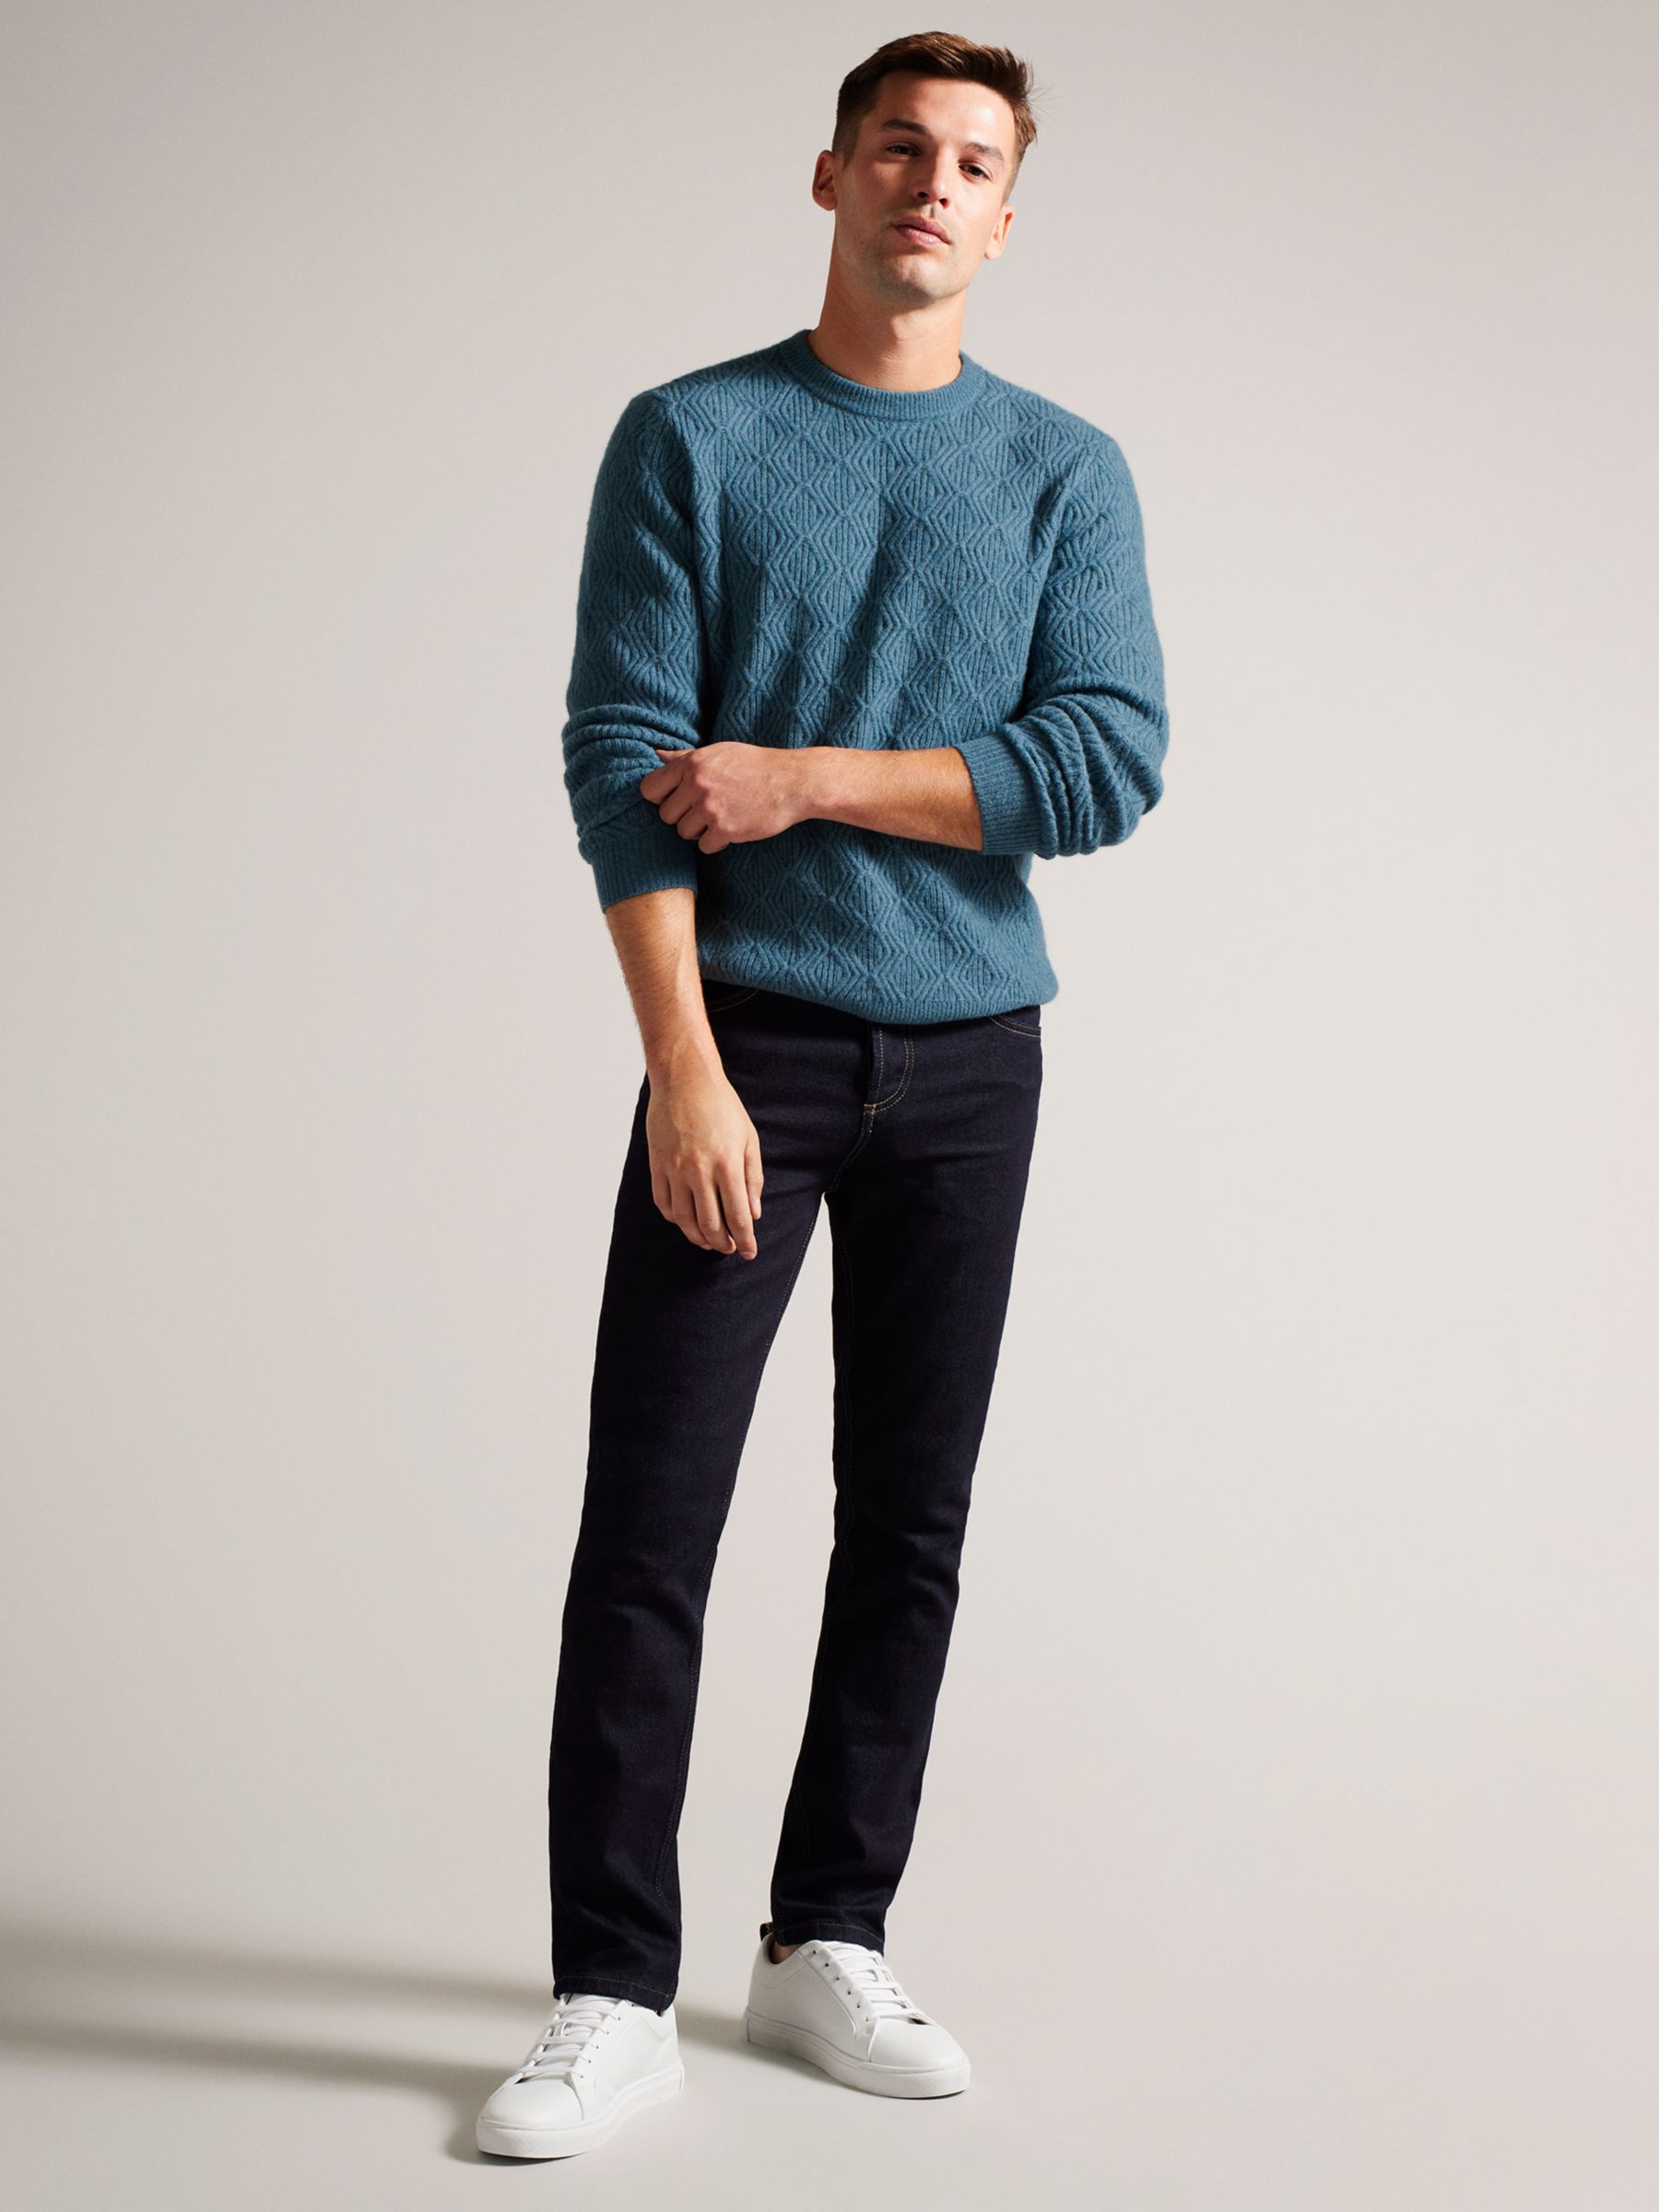 Buy Ted Baker Atchet Long Sleeve Textured Cable Crew Neck Jumper Online at johnlewis.com